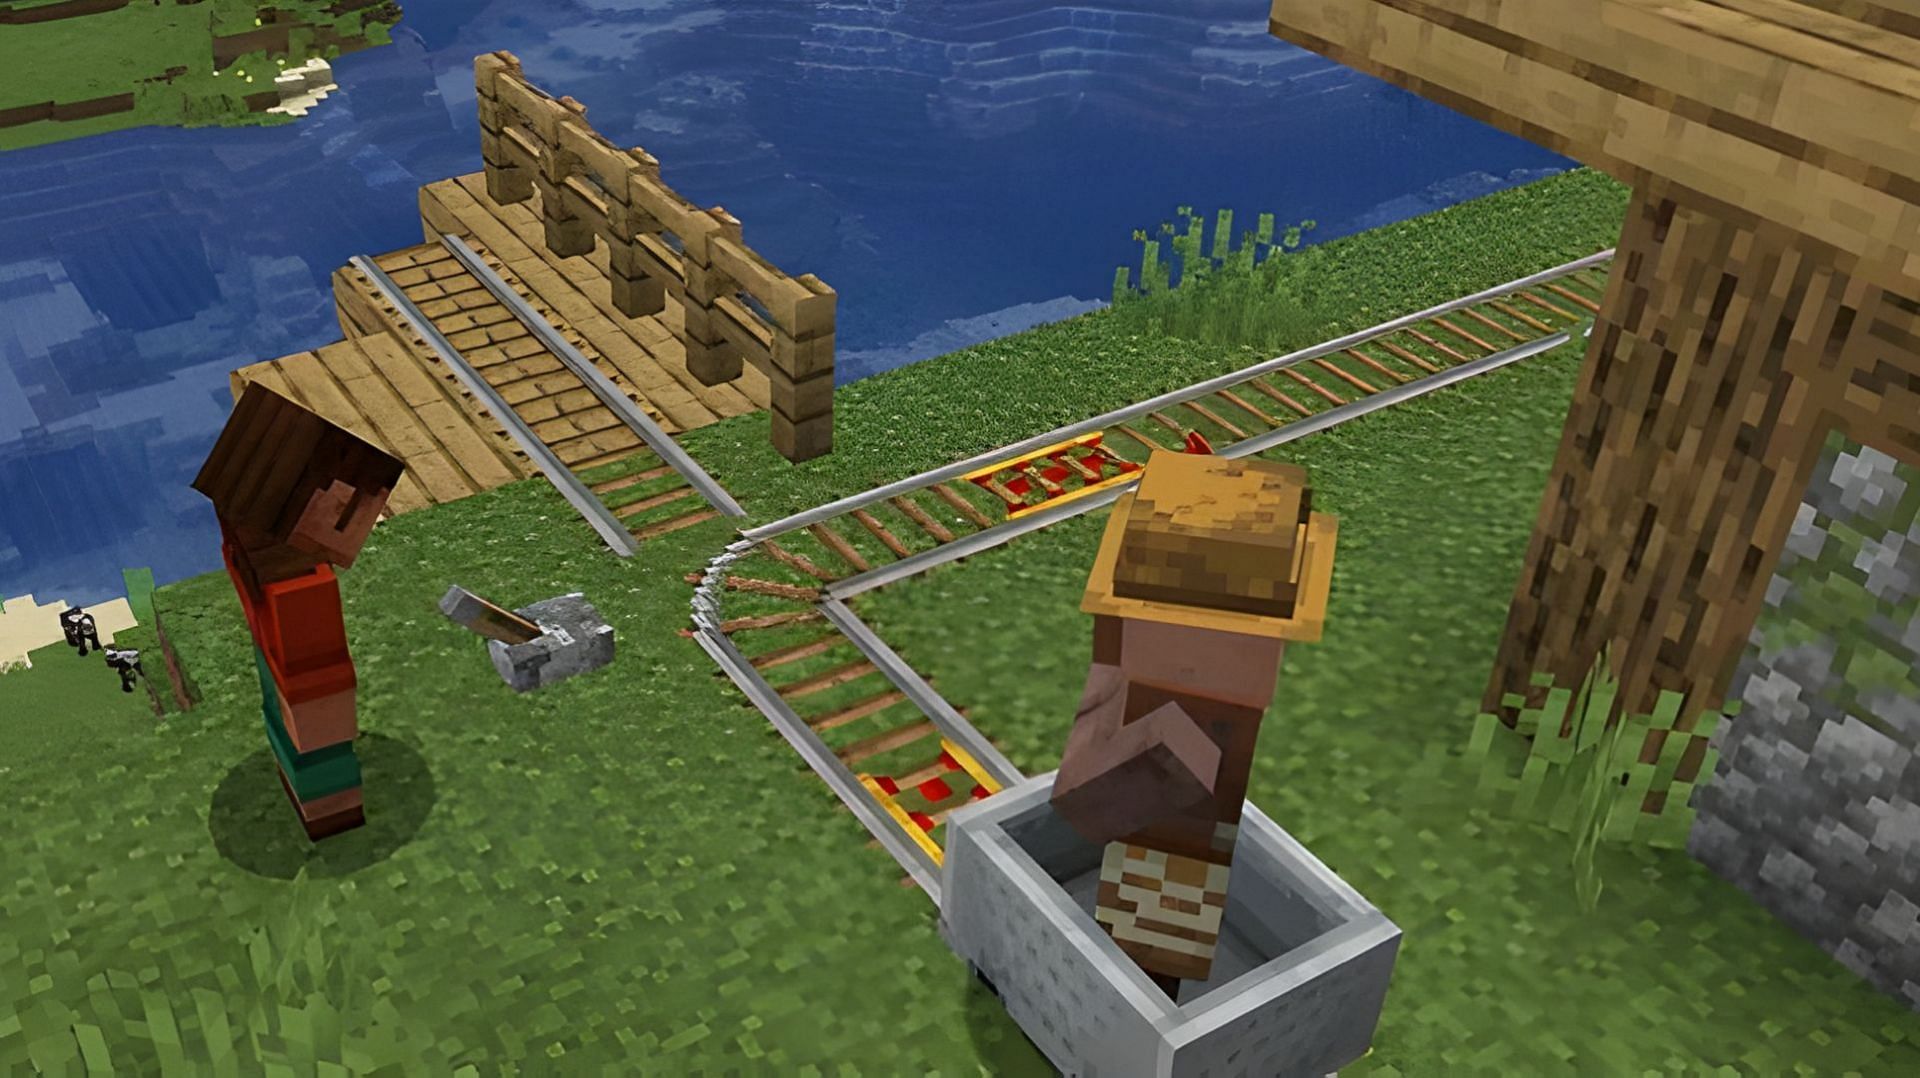 A player looks at a villager riding a minecart in Minecraft.